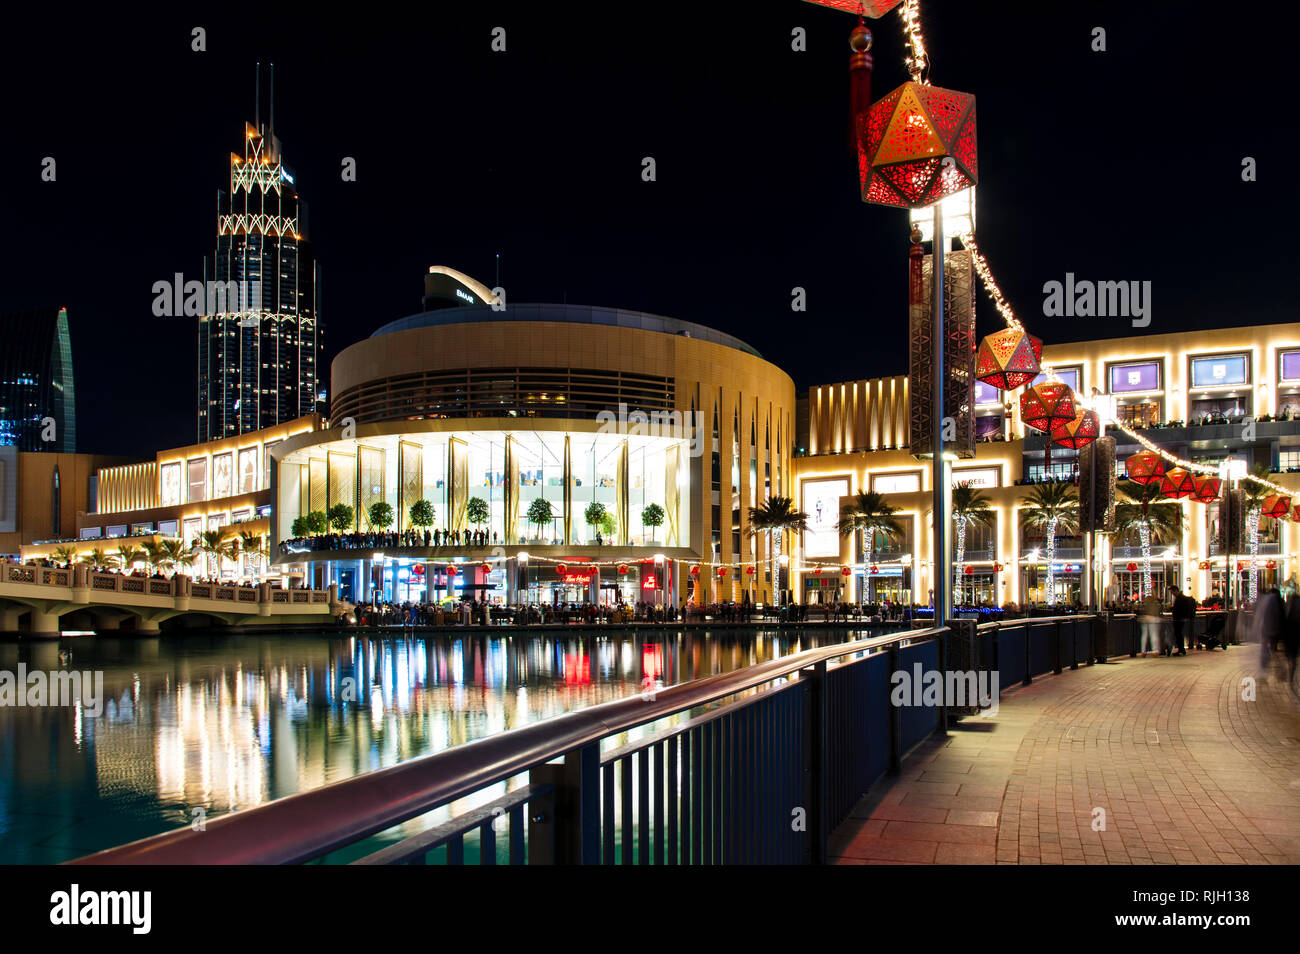 Dubai, United Arab Emirates - February 4, 2018: Dubai mall outdoors walkway with tourists and visitors, beeing one of the main travel attractions in D Stock Photo